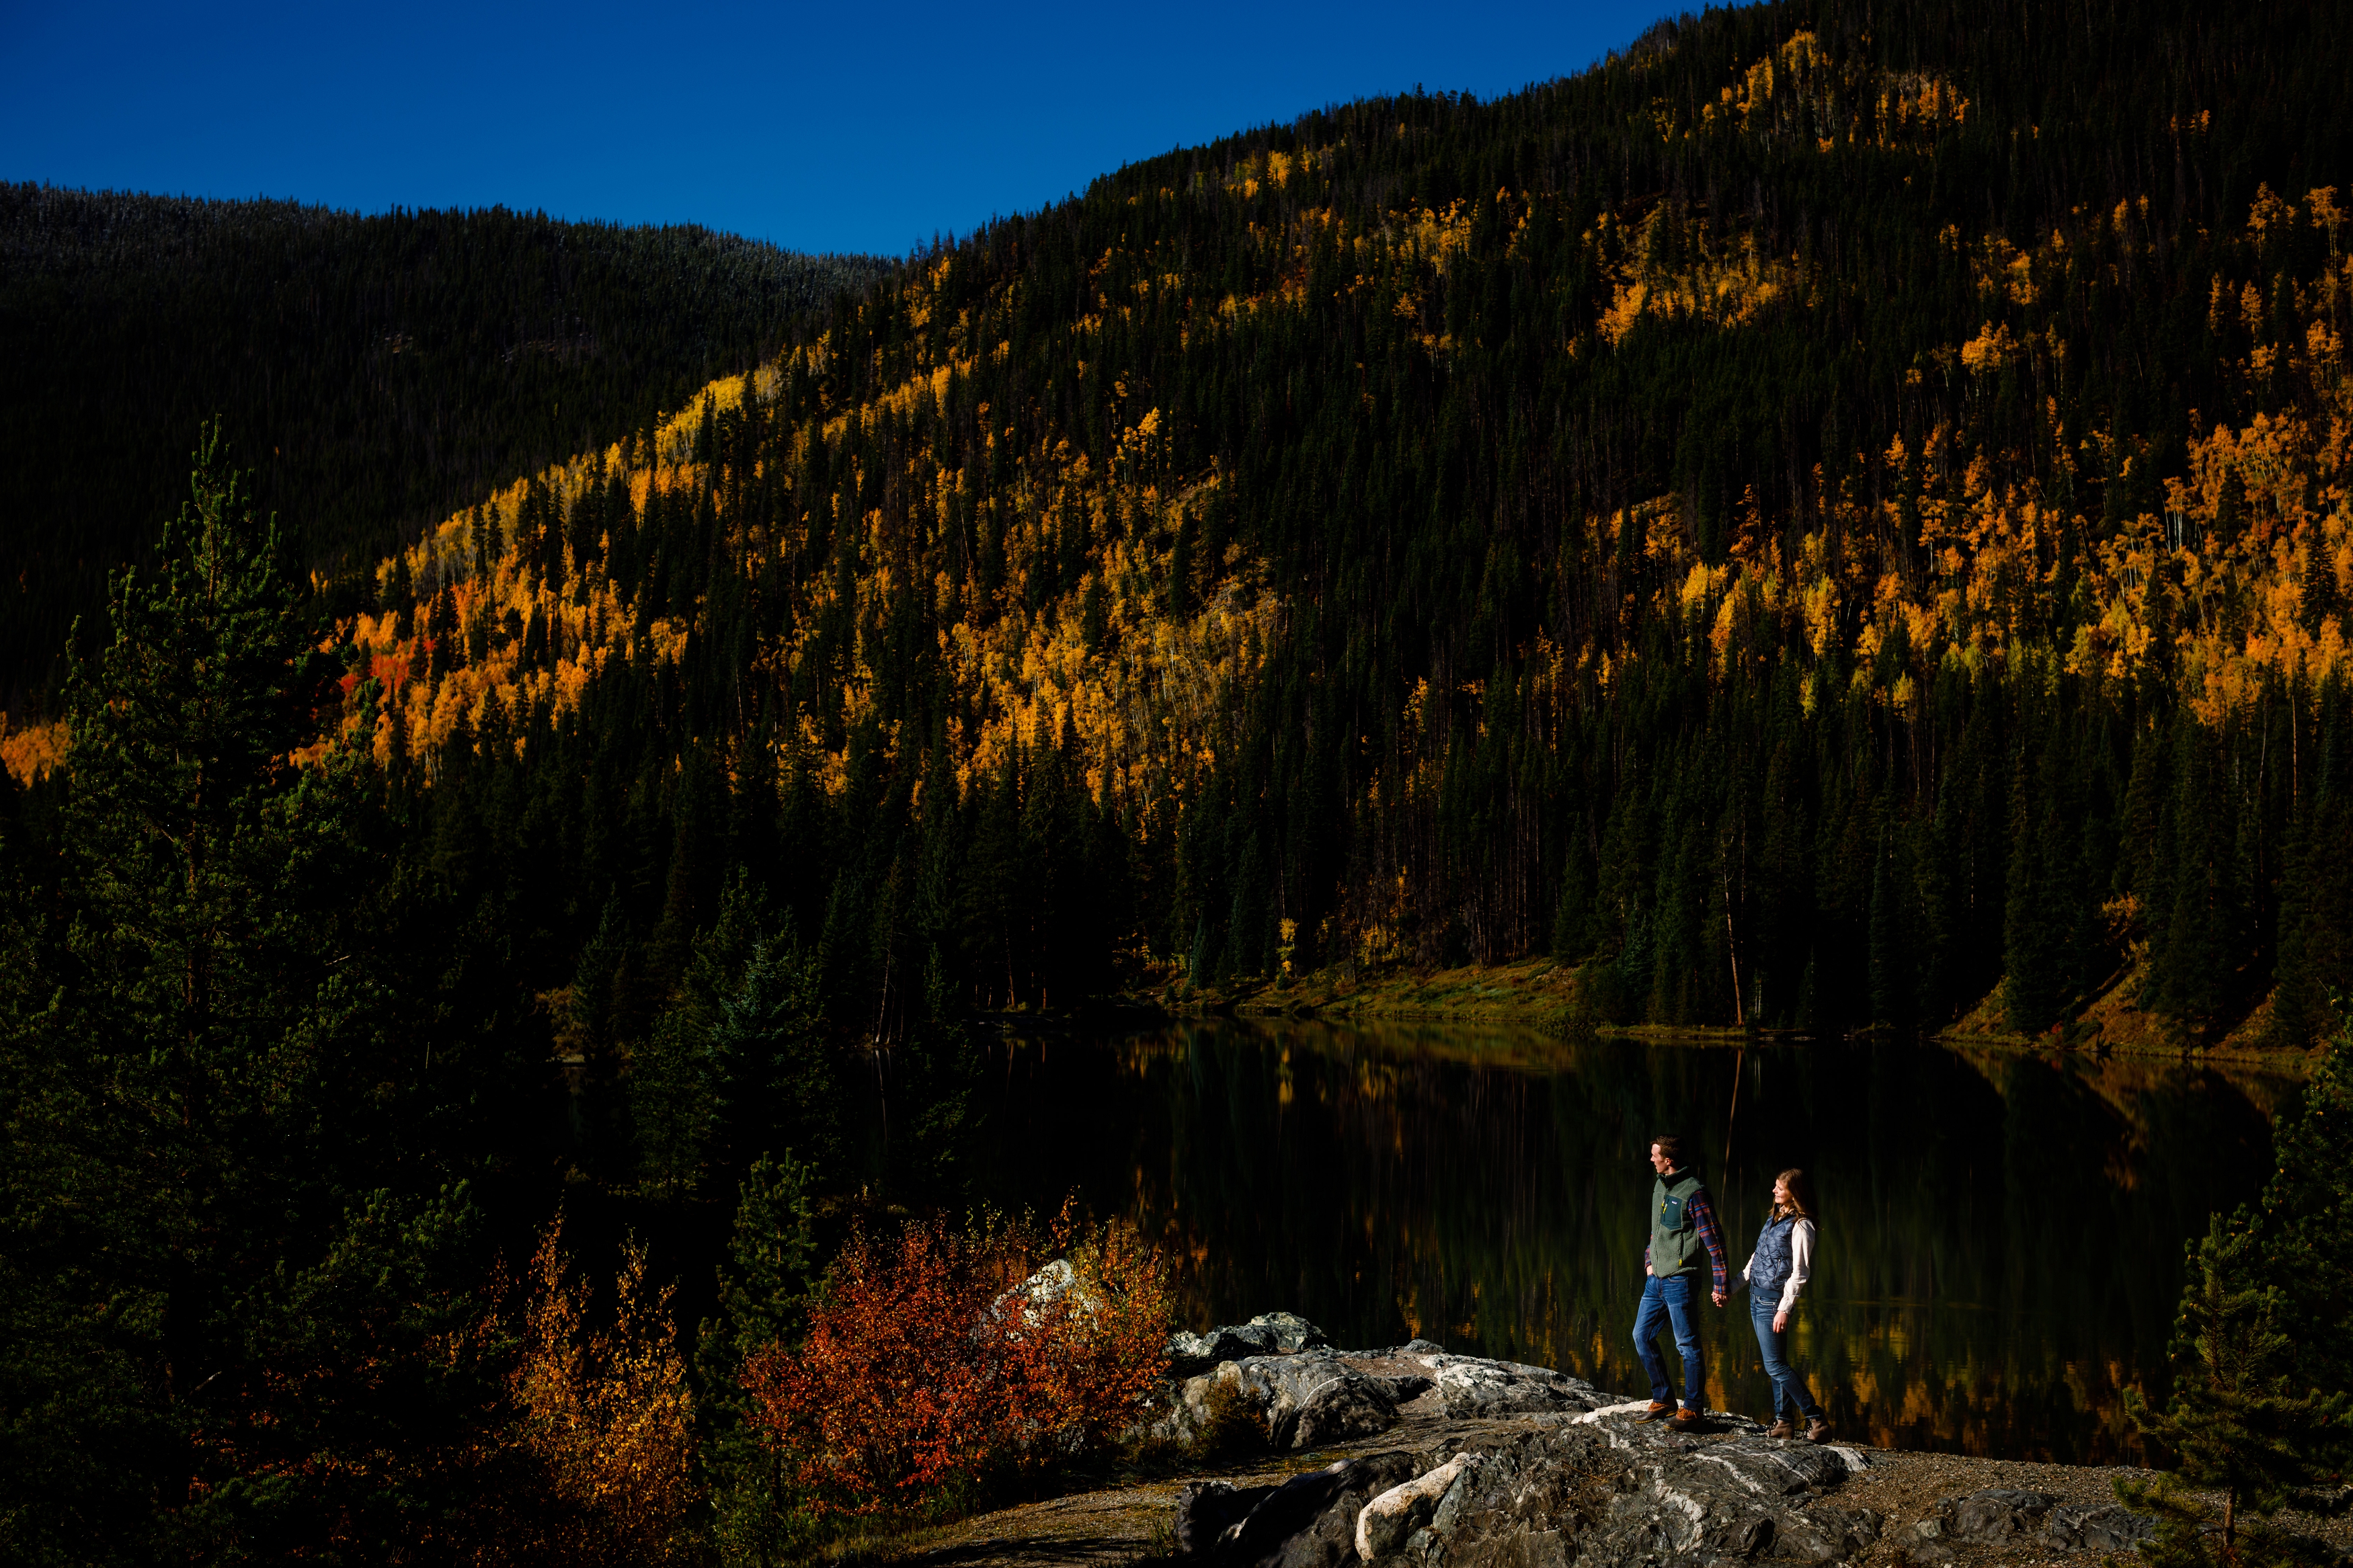 Fall colors for Jake & Jessica at Officers Gulch during their engagement photo session.